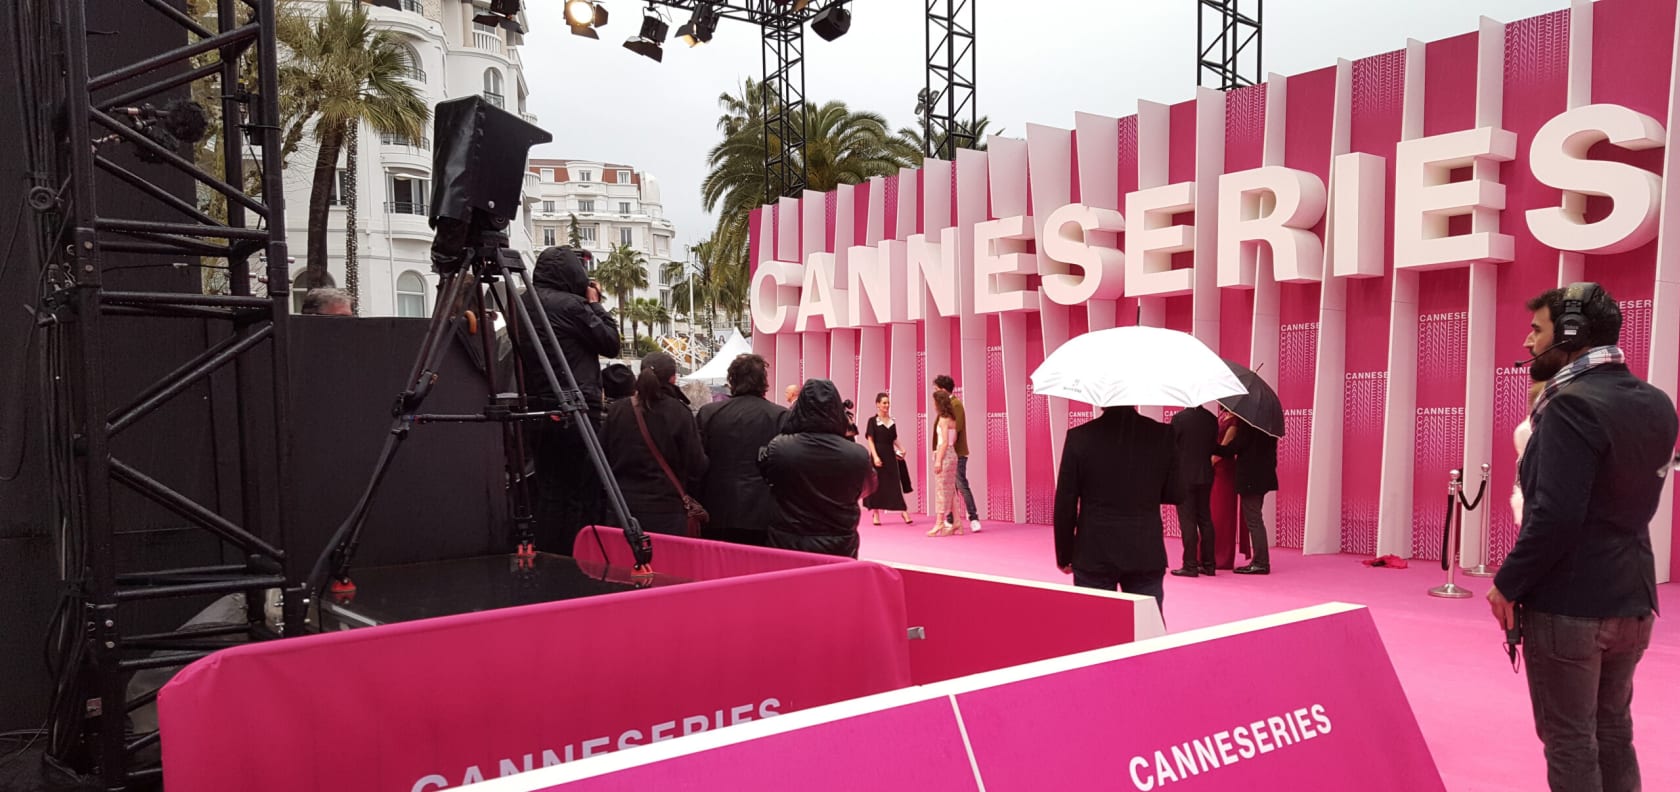 Cannes Series event.